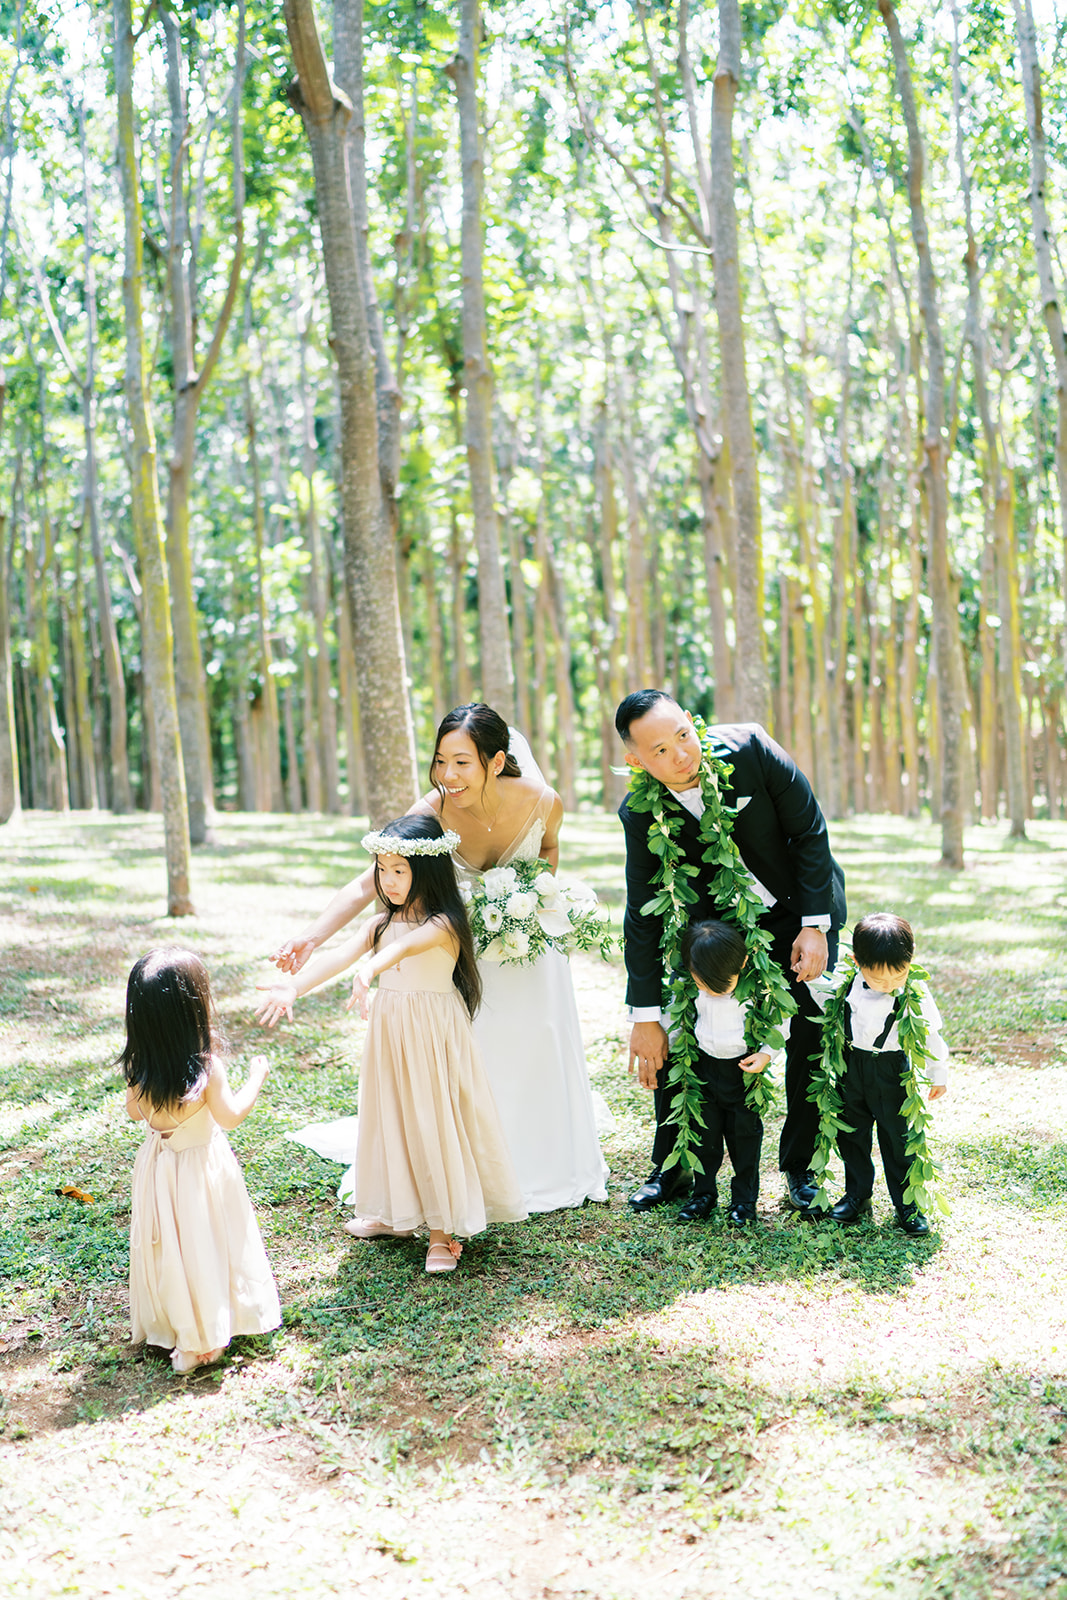 A family with two adults and three children dressed in formal attire, engaging playfully in a sunlit forest clearing